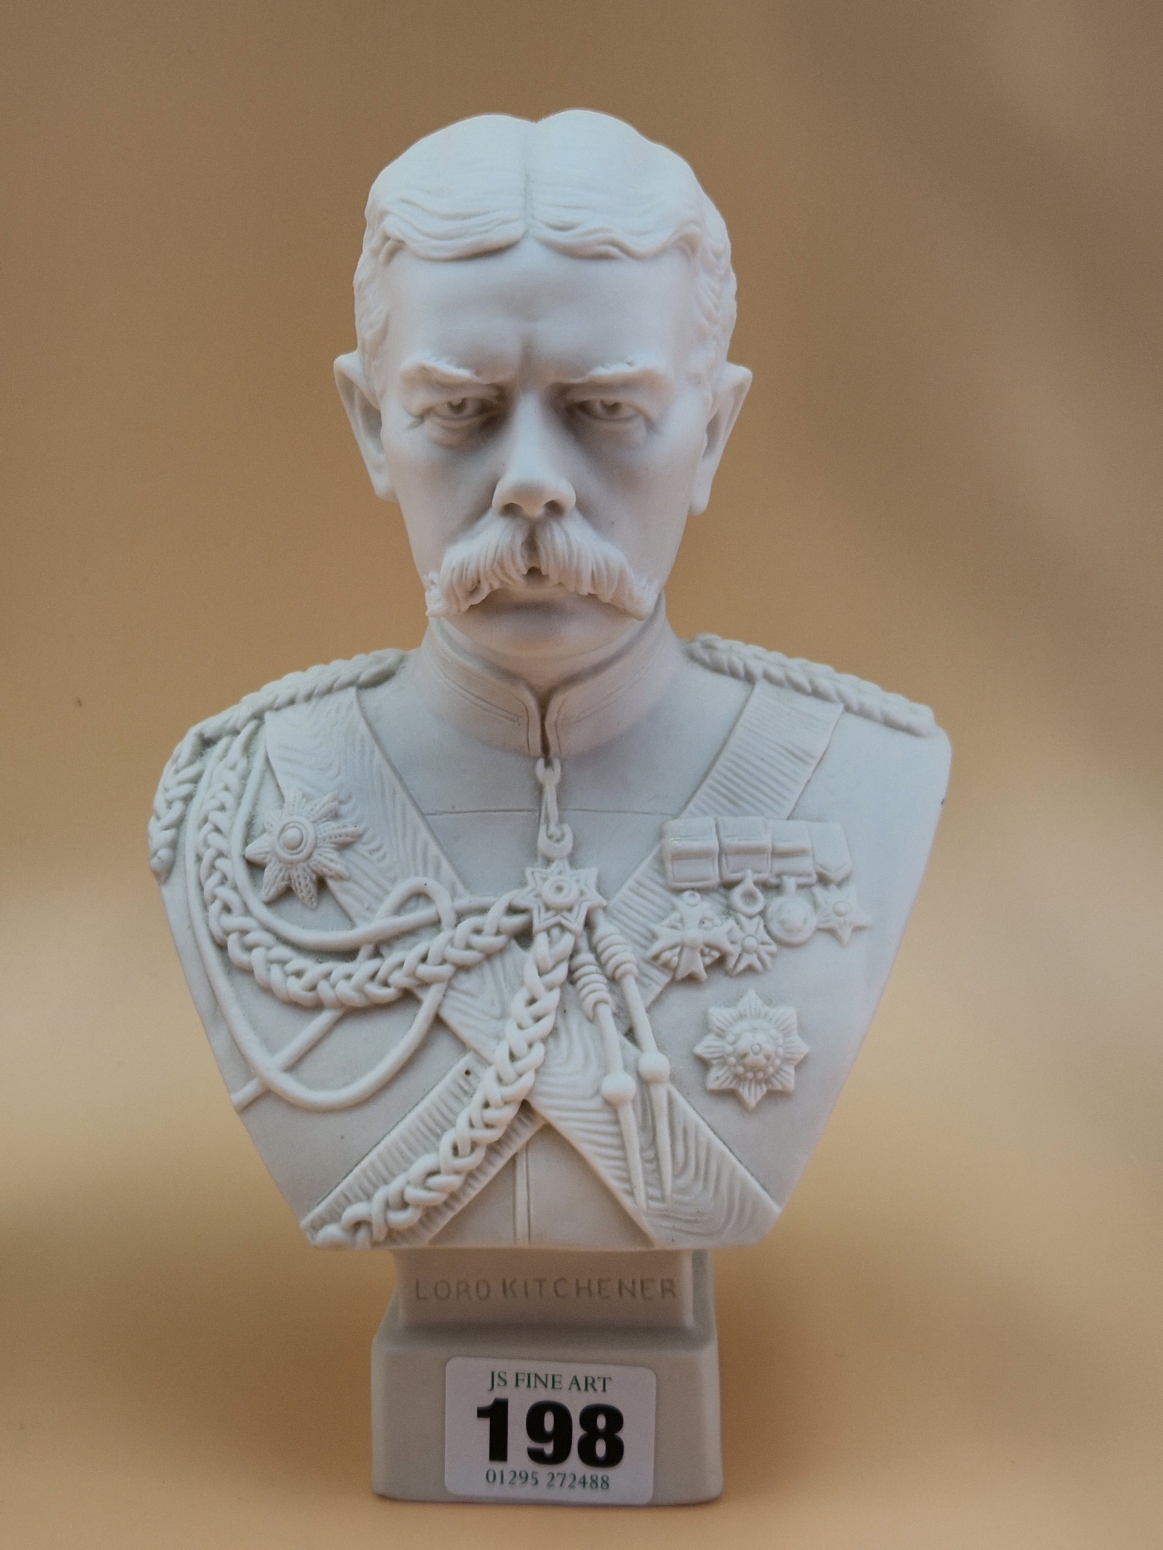 A ROBINSON & LEADBEATER PARIAN BUST OF LORD KITCHENER AFTER W C LAWTON. H 21cms TOGETHER WITH A GOSS - Image 2 of 5